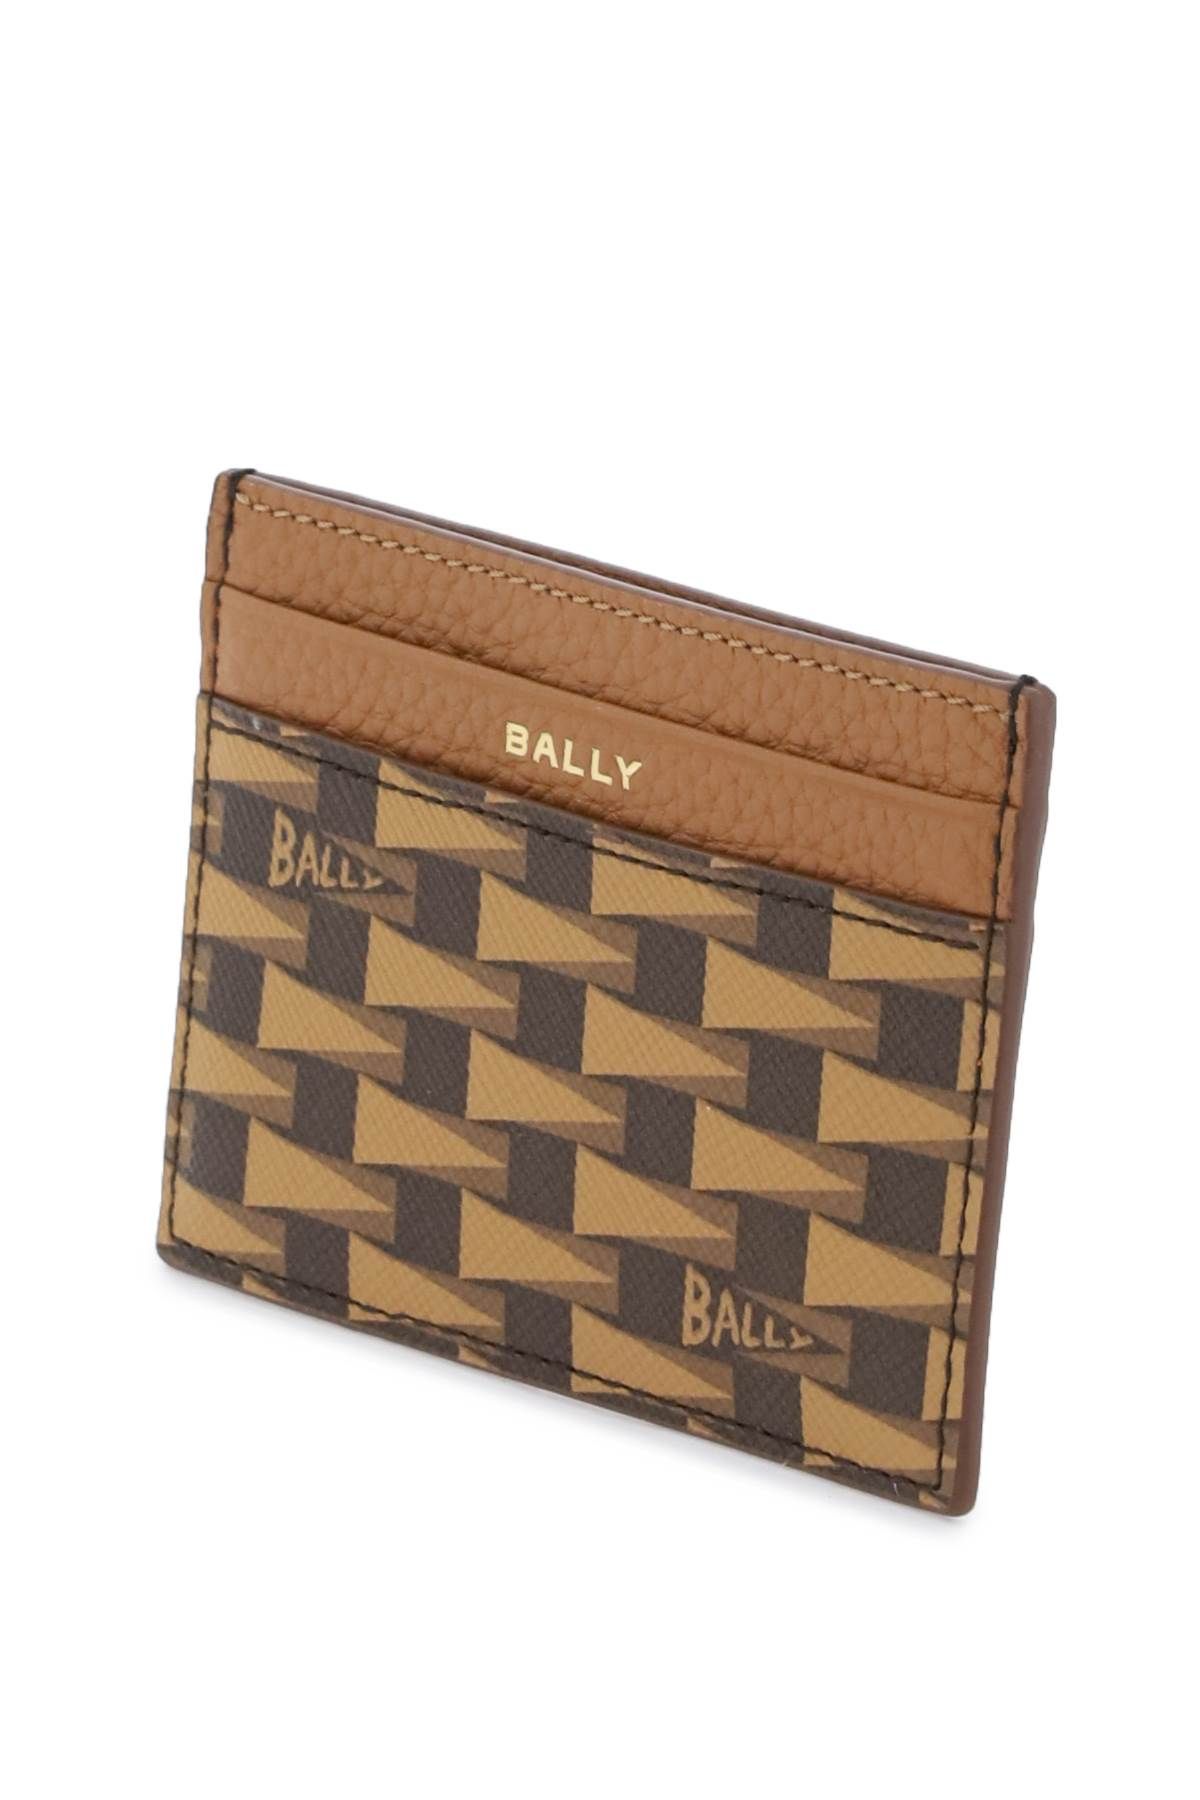 Shop Bally Pennant Business Cardholder In Brown